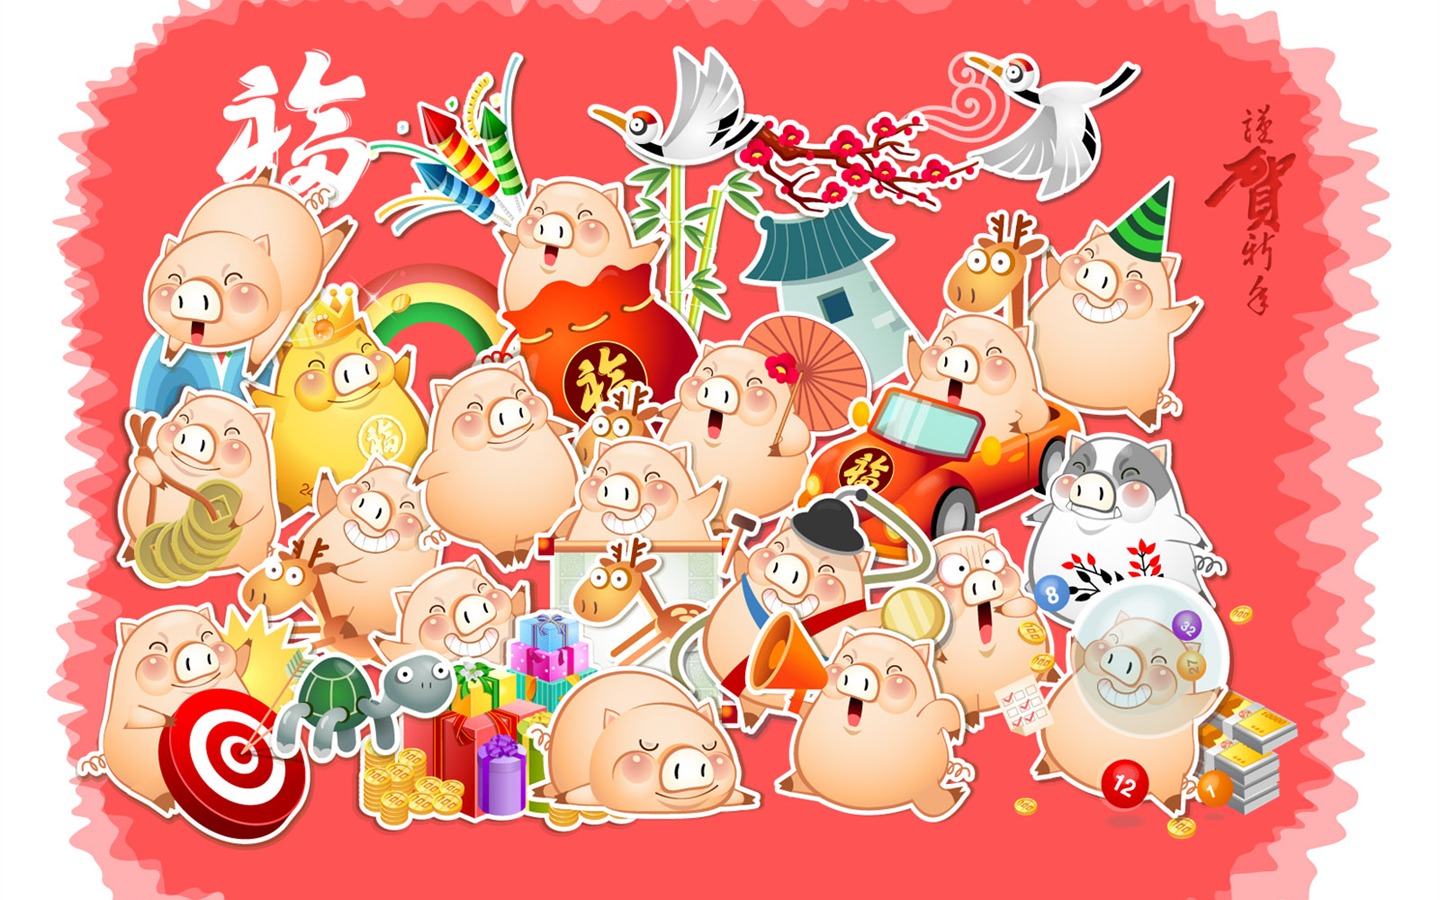 Year of the Pig Theme Wallpaper #11 - 1440x900